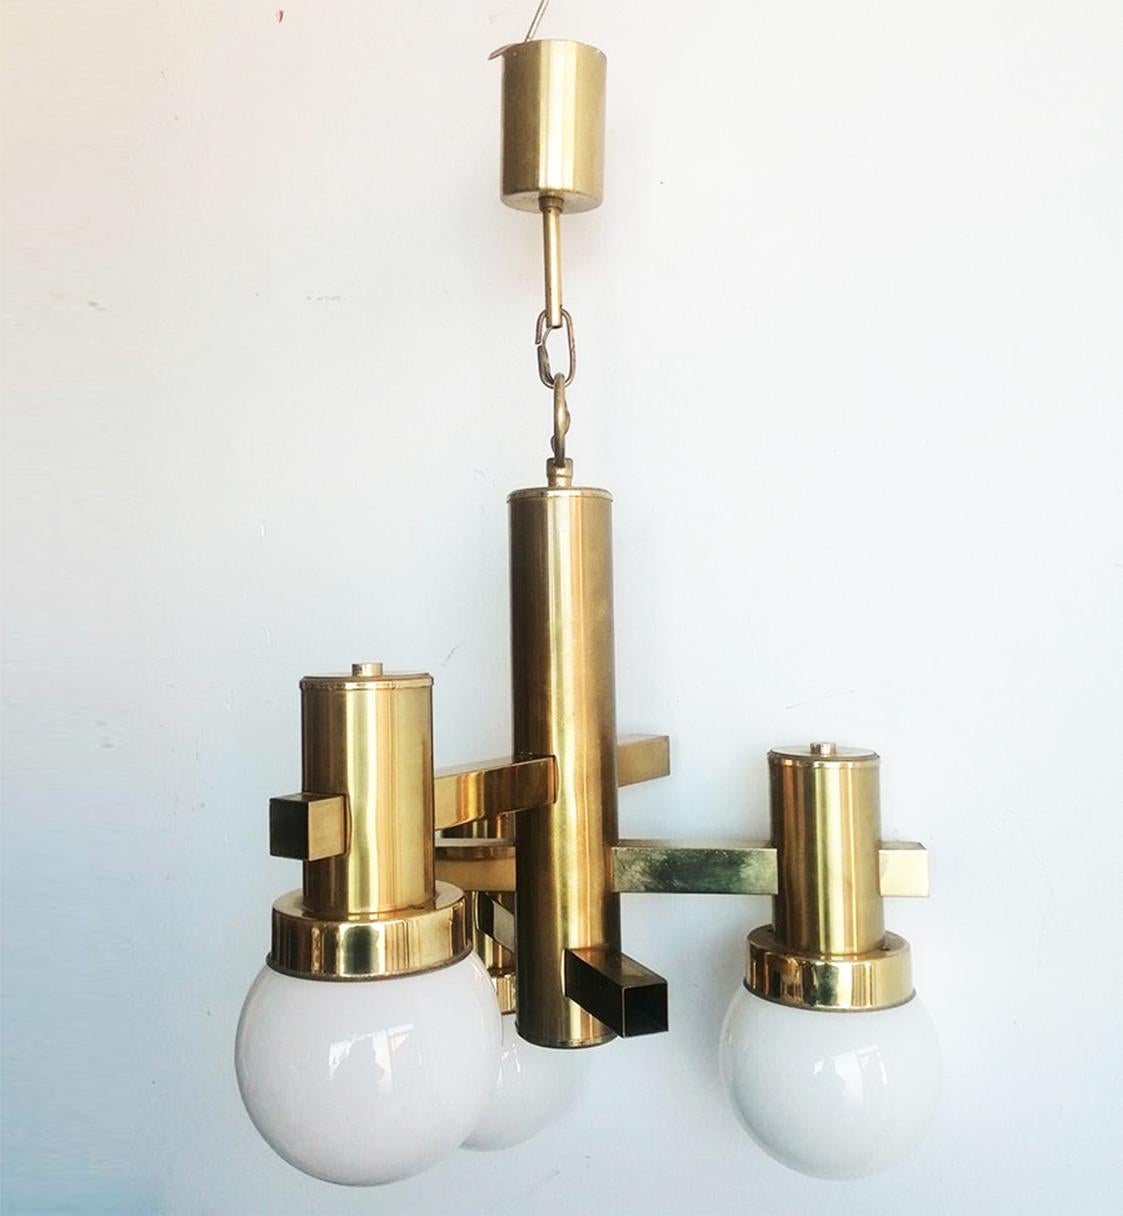 Midcentury Italian brass chandelier. Sciolari style

Round tulips and 3 opal glass

Height can be shortened

With 3 lights.

Ideal lamps to illuminate a space, room, living room, bedroom or entrance.

